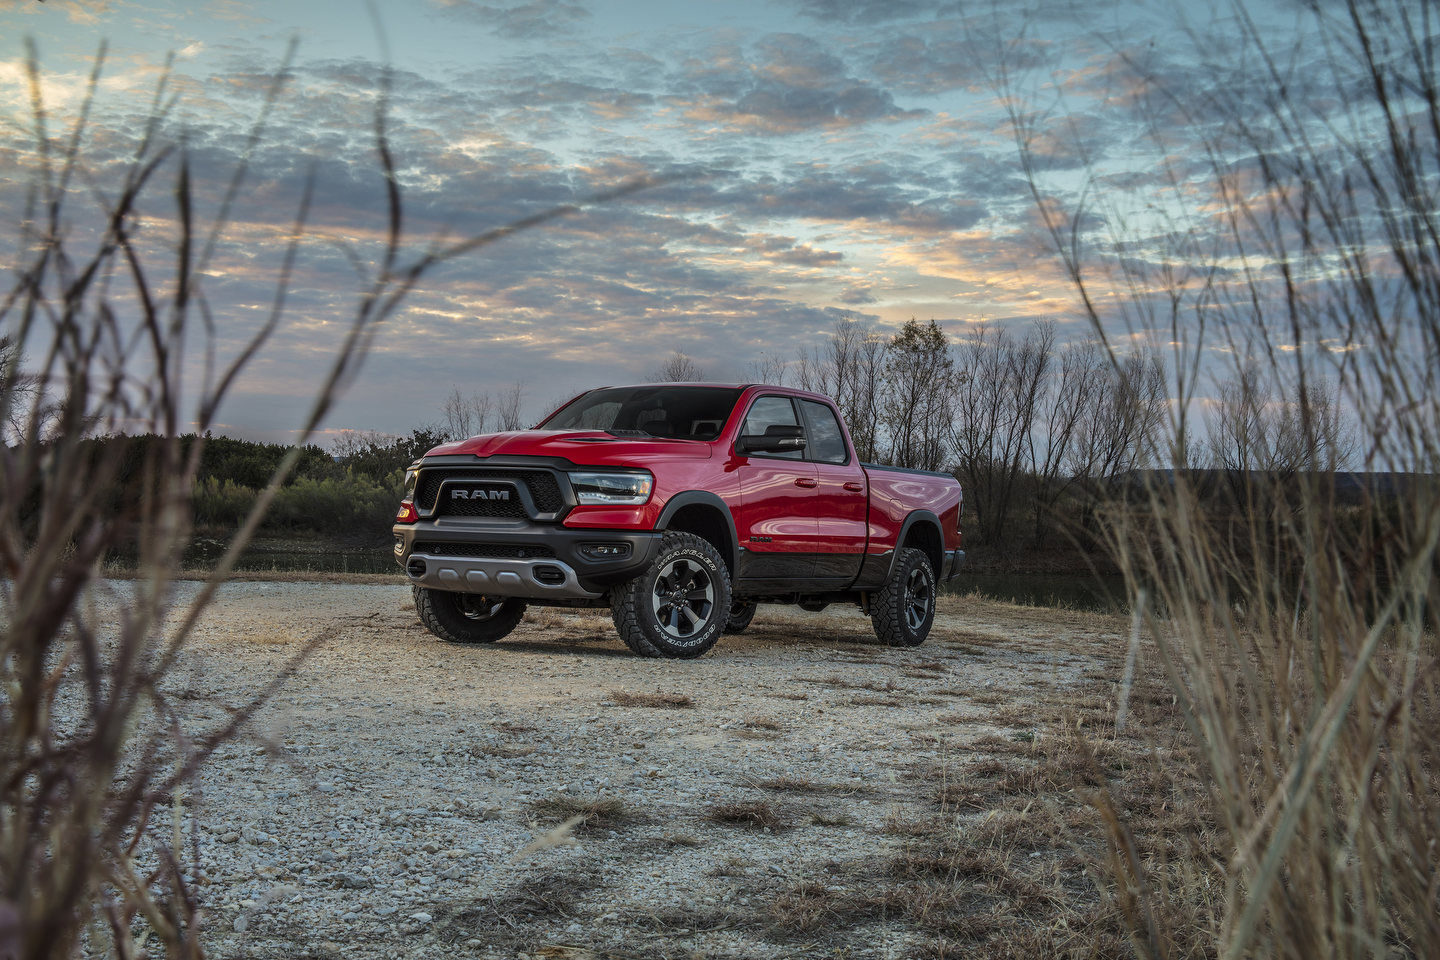 2022 Ram 1500 vs 2022 Ford F-150: Fierce competition